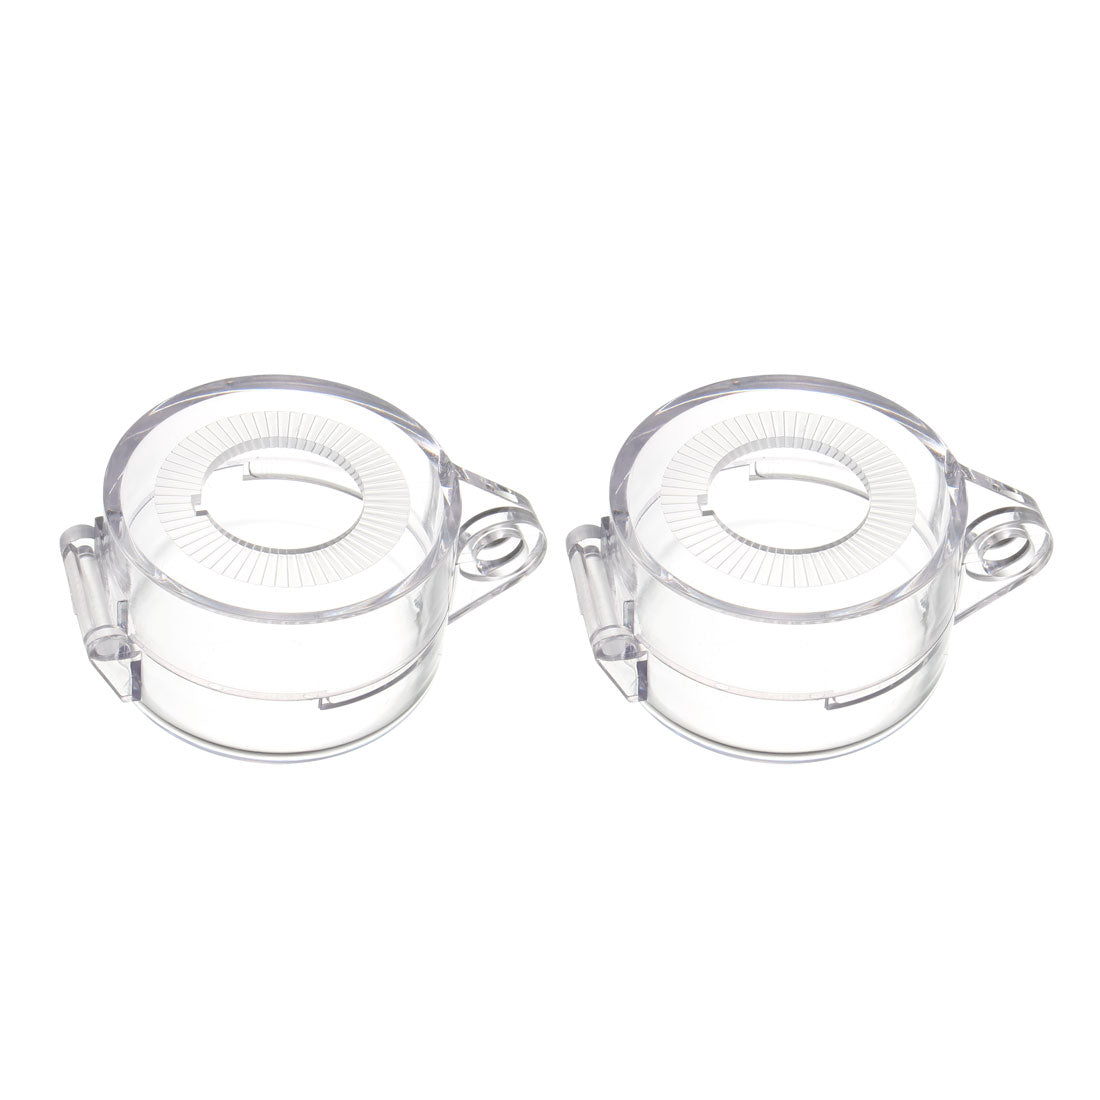 Uxcell Uxcell 2pcs Clear Plastic Switch Cover Protector for 30mm Diameter Push Button Switch 50*32